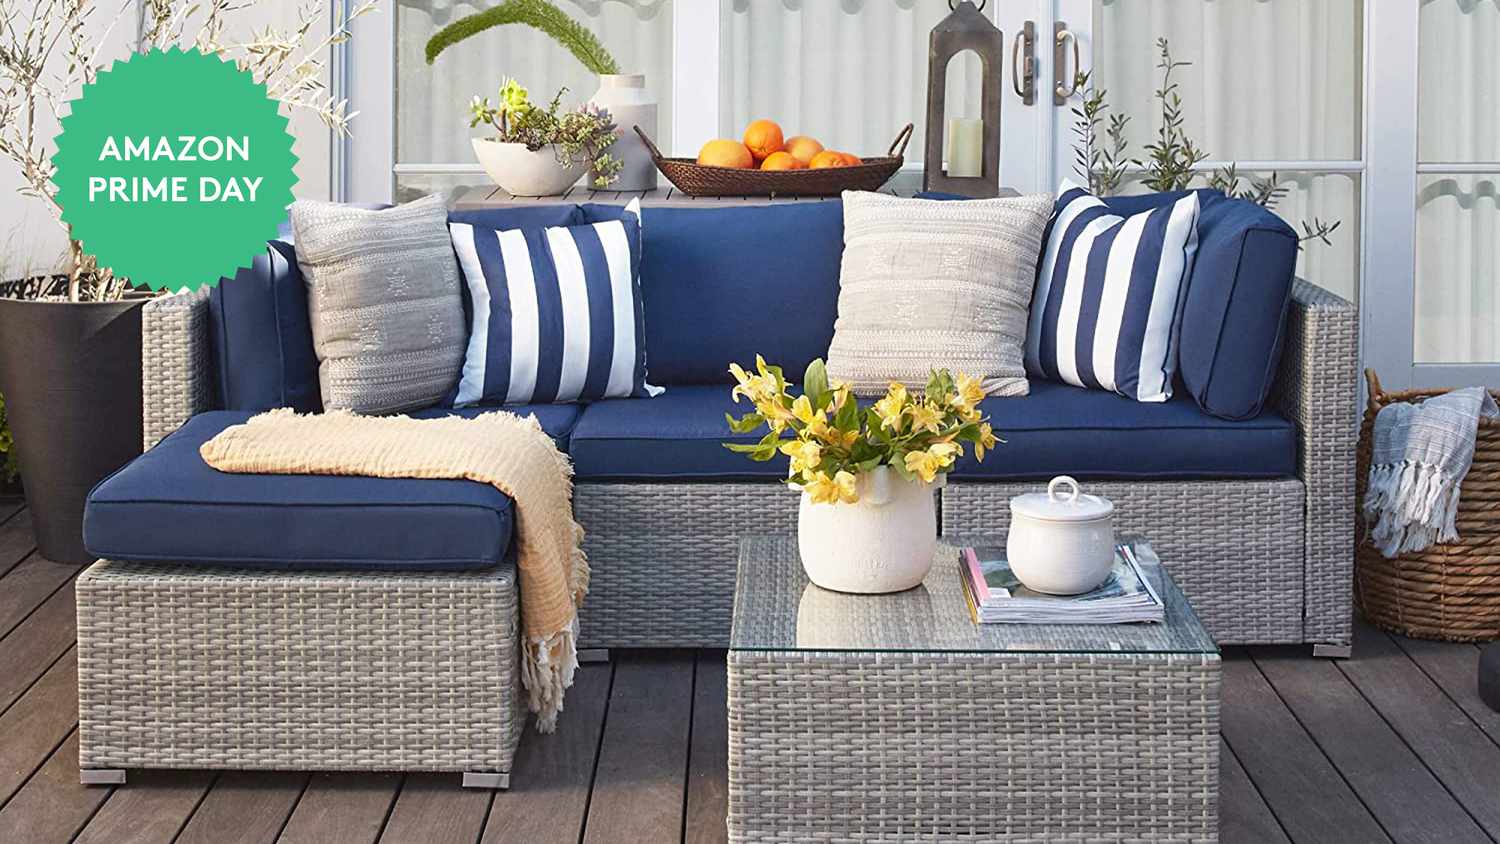 Epic Amazon Prime Day Patio Furniture Deals Up to 58% Off